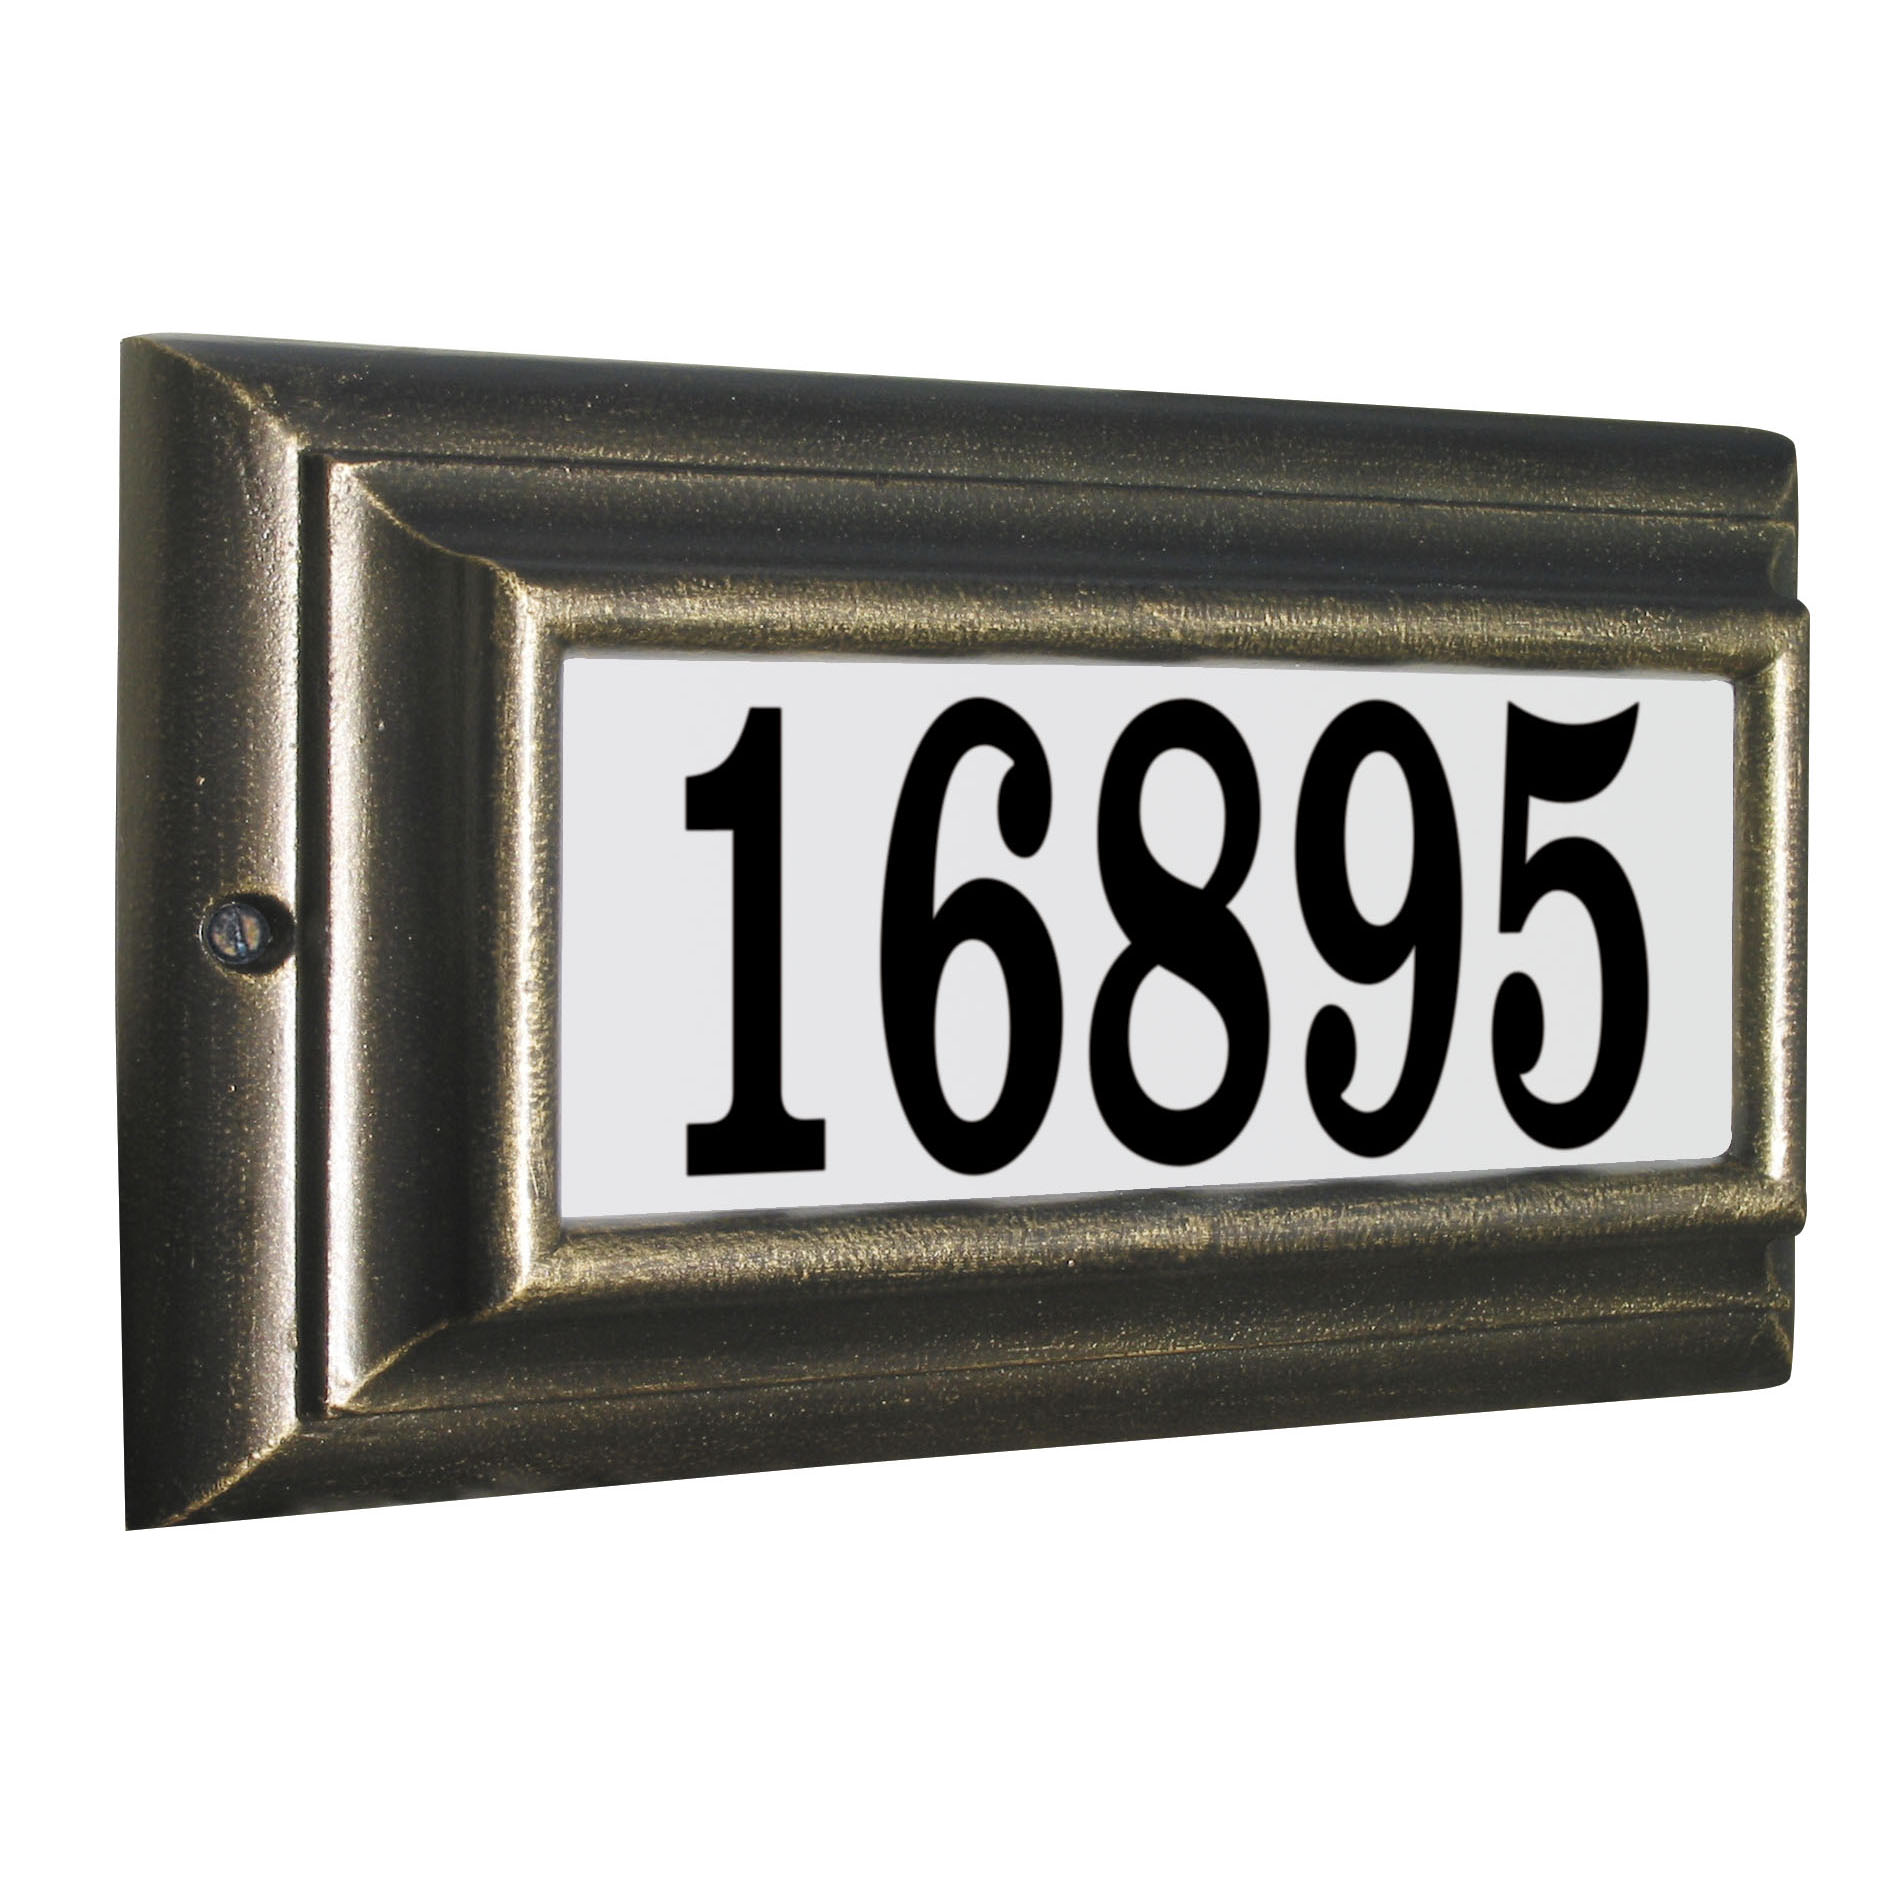 Edgewood Standard Lighted Address Plaque In French Bronze Frame Color With Led Lights